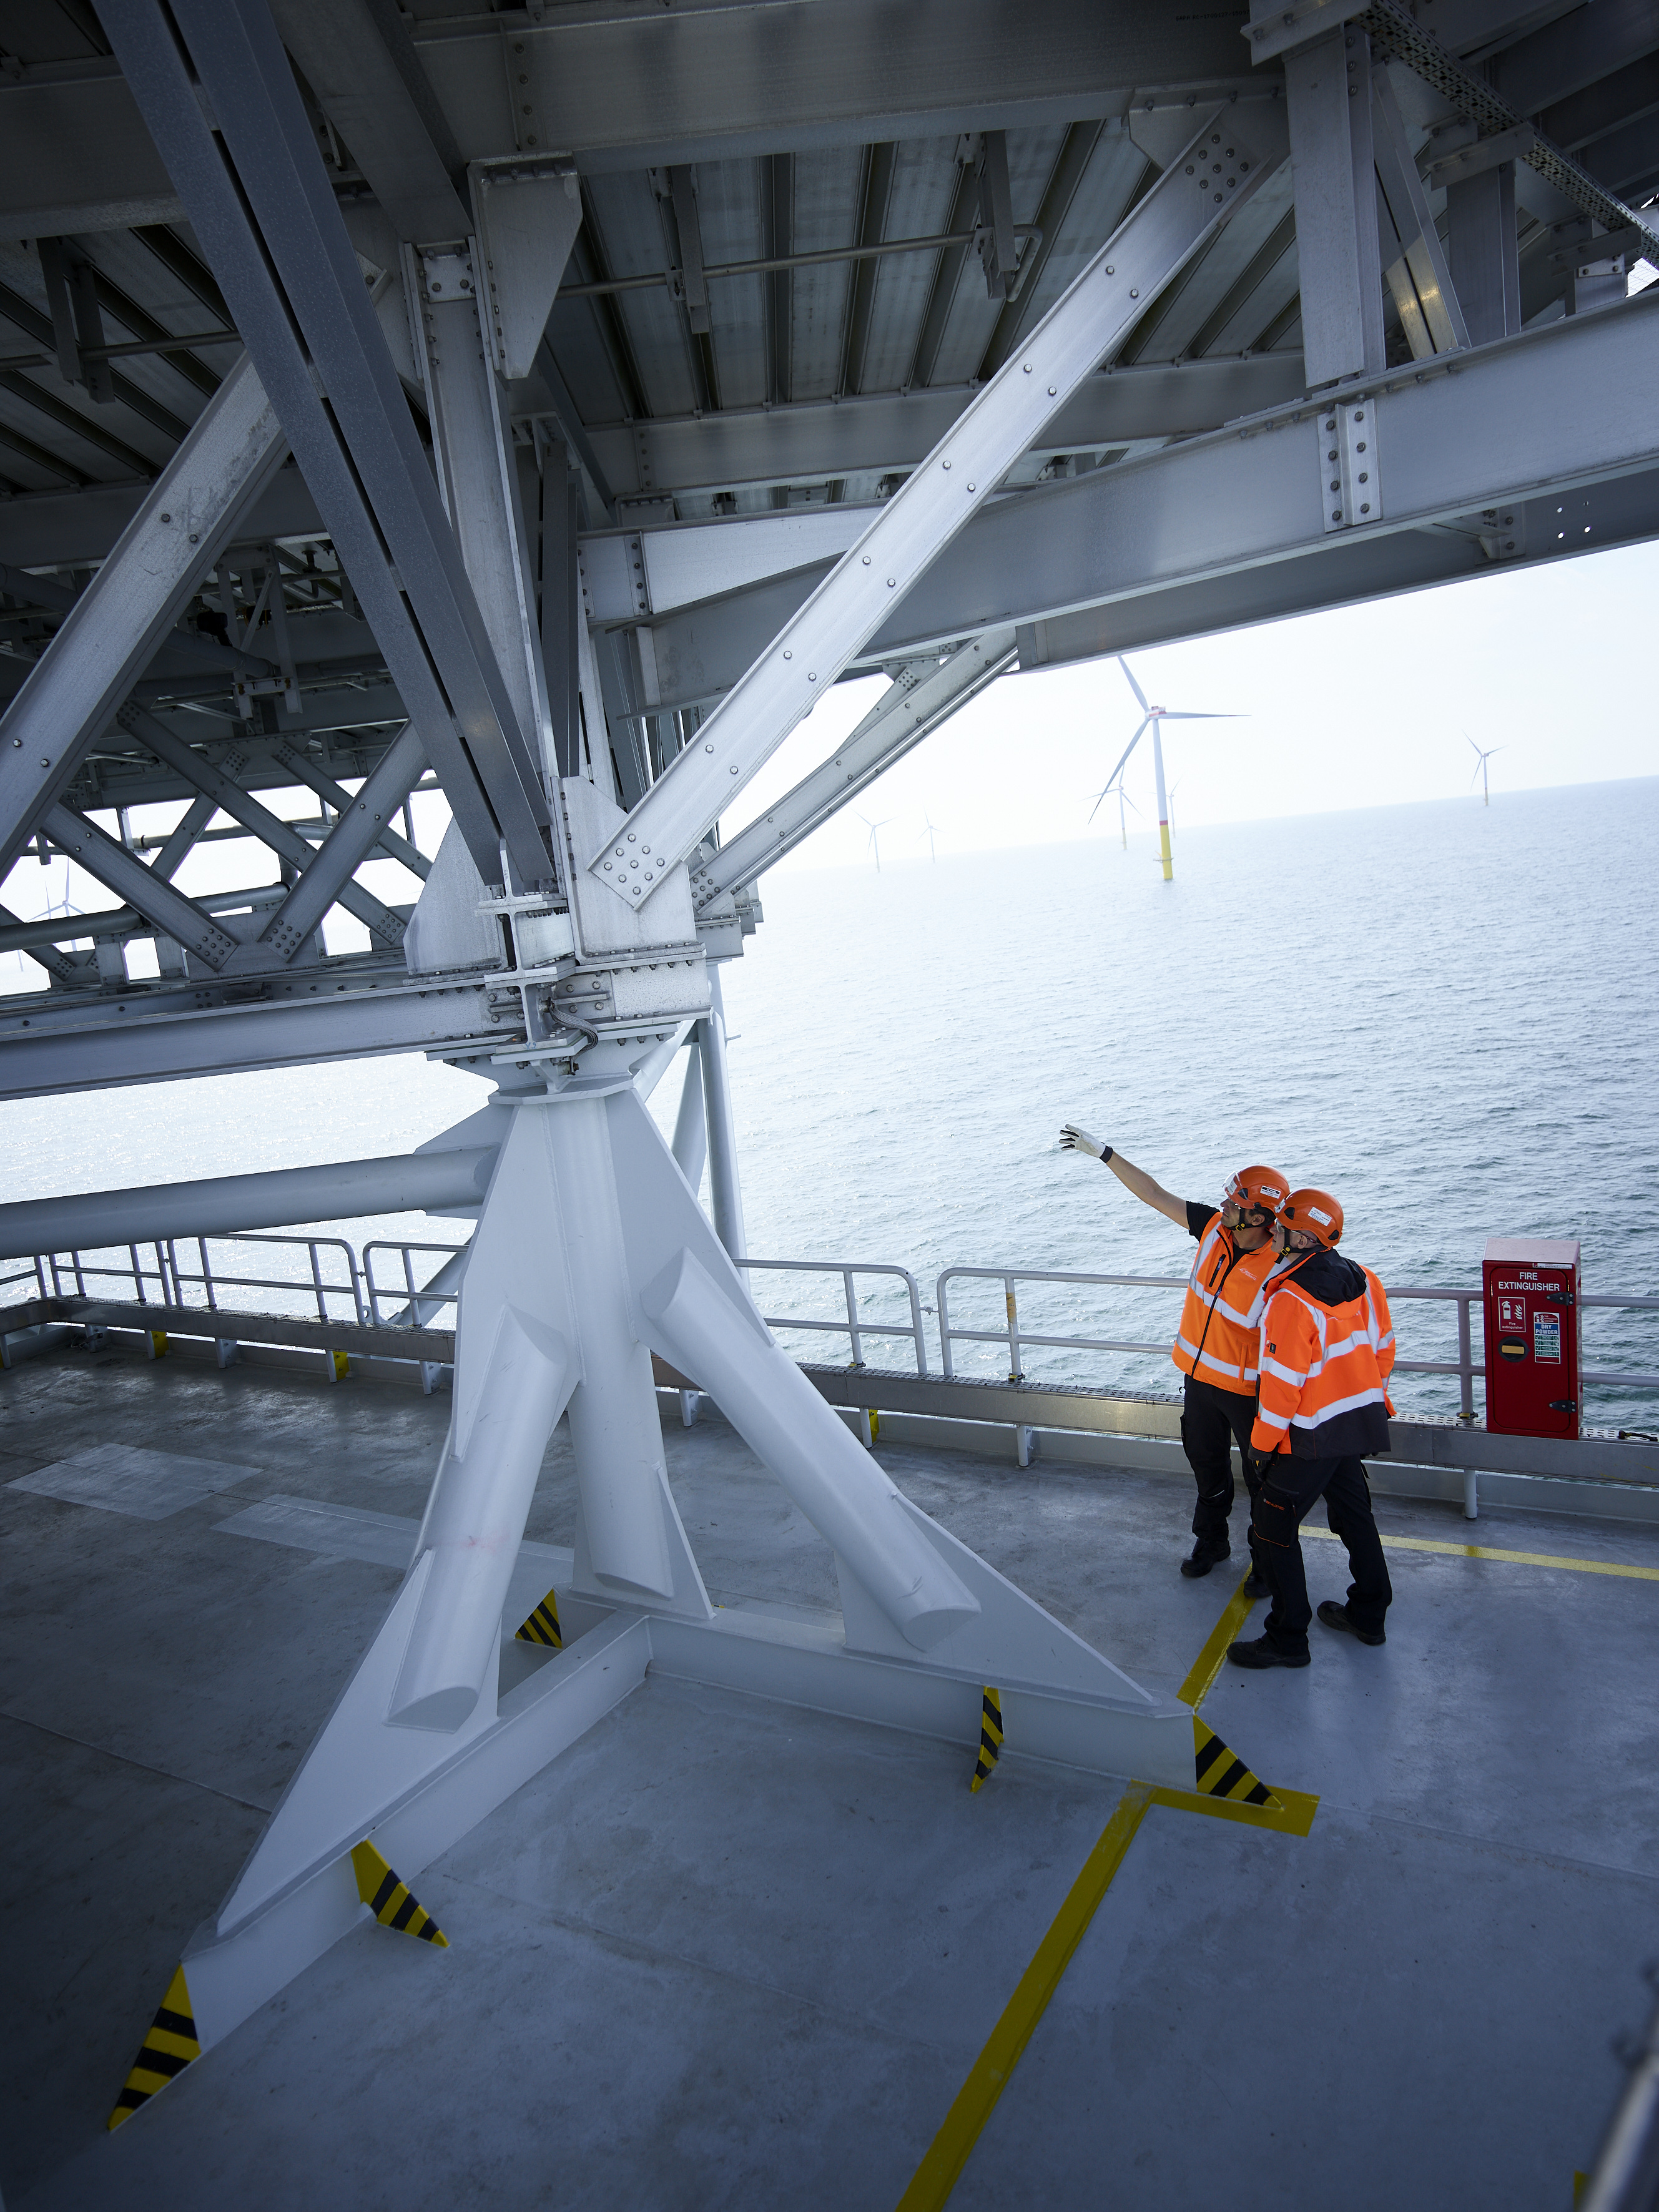 50Hertz employees conducting an inspection on an offshore platform in the Baltic Sea.